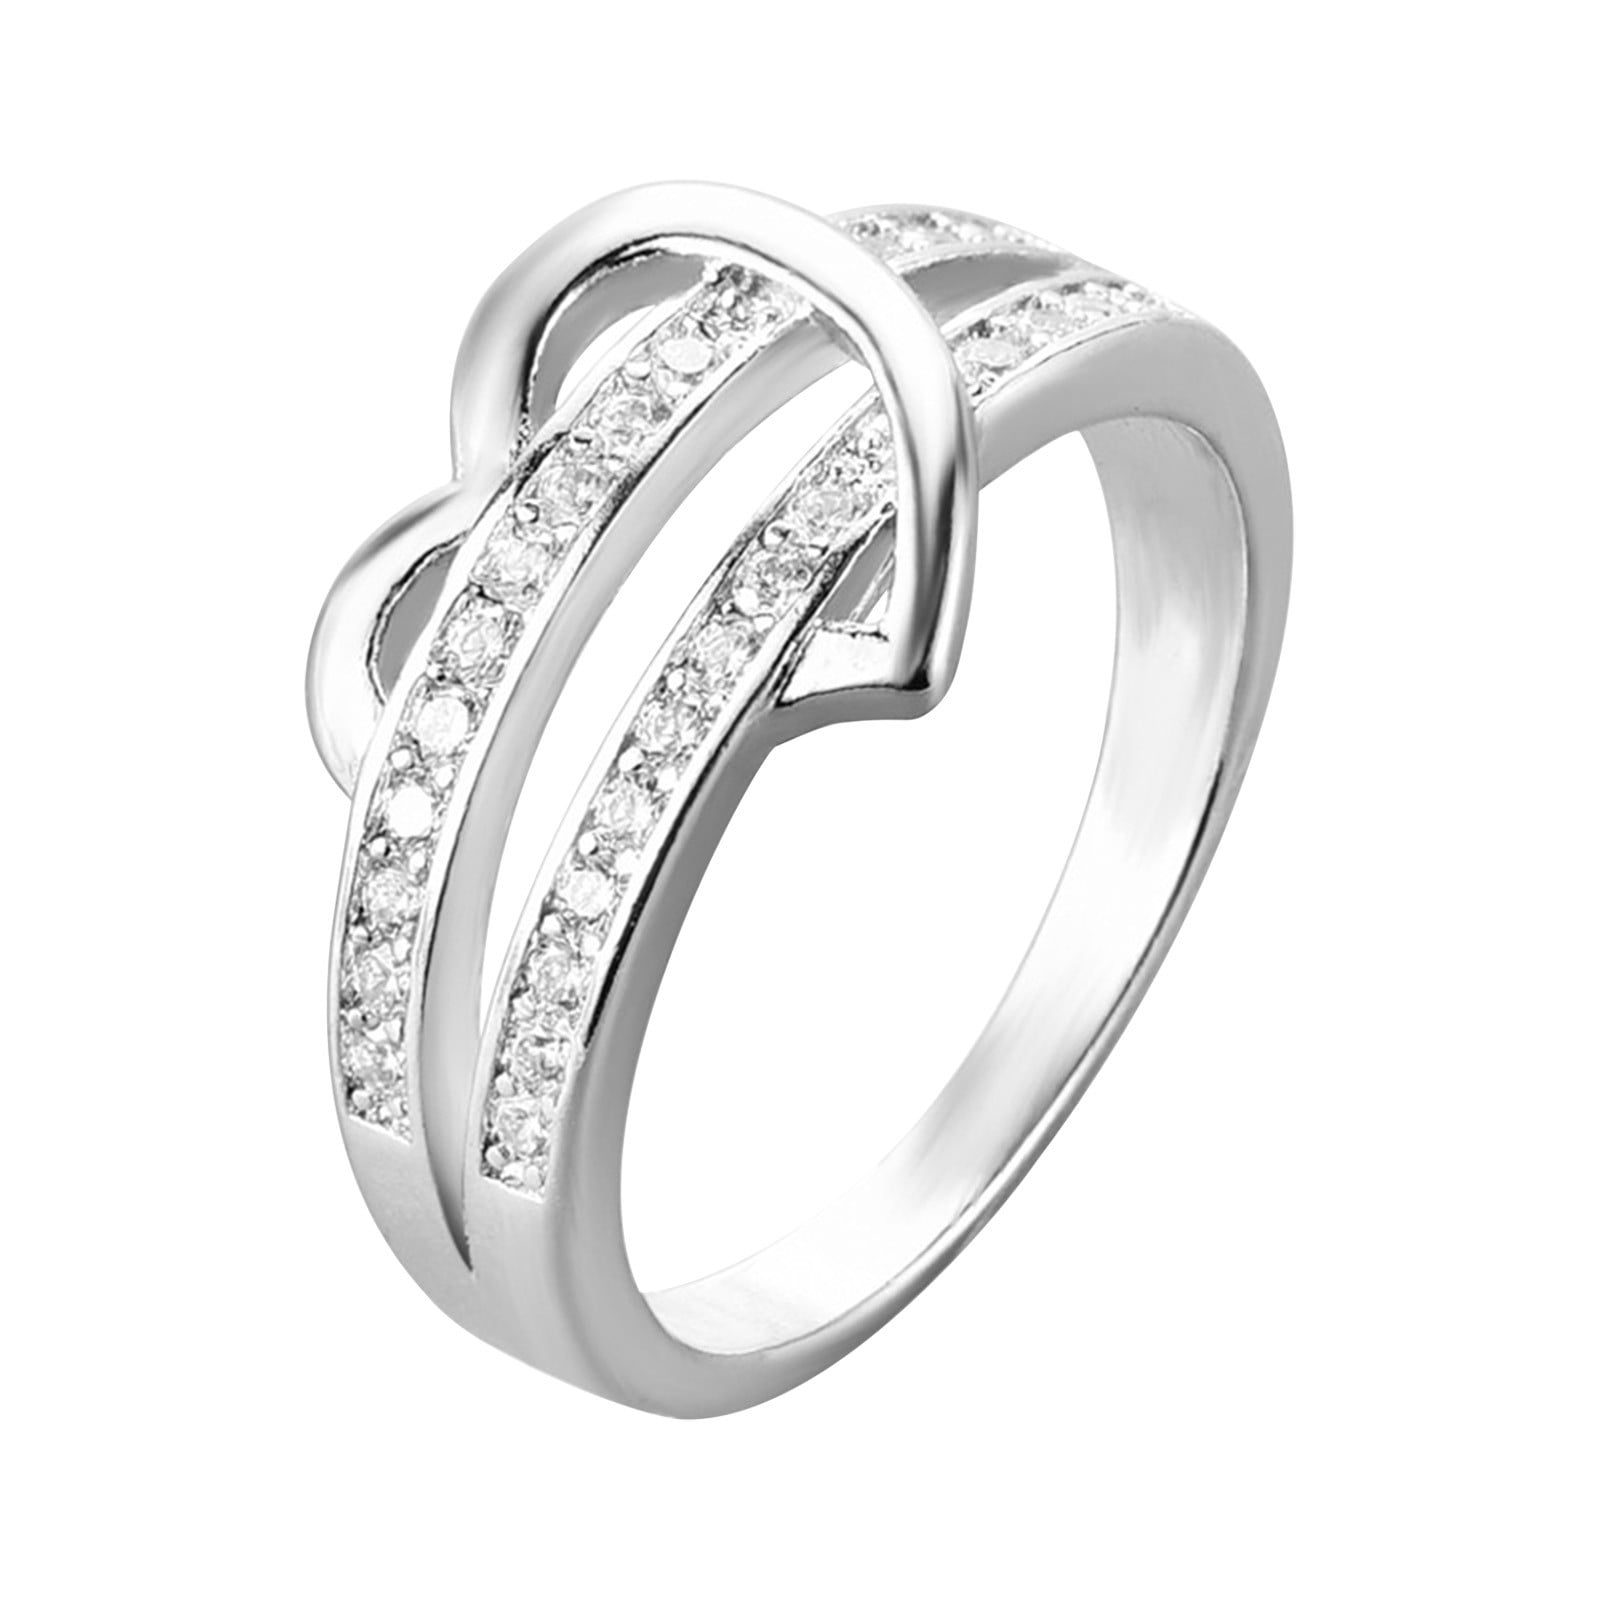 Mesmerizing Sterling Silver Ladies Finger Ring Studded with Three Solitaire  Cubic Zirconias by Ishira : Amazon.in: Fashion